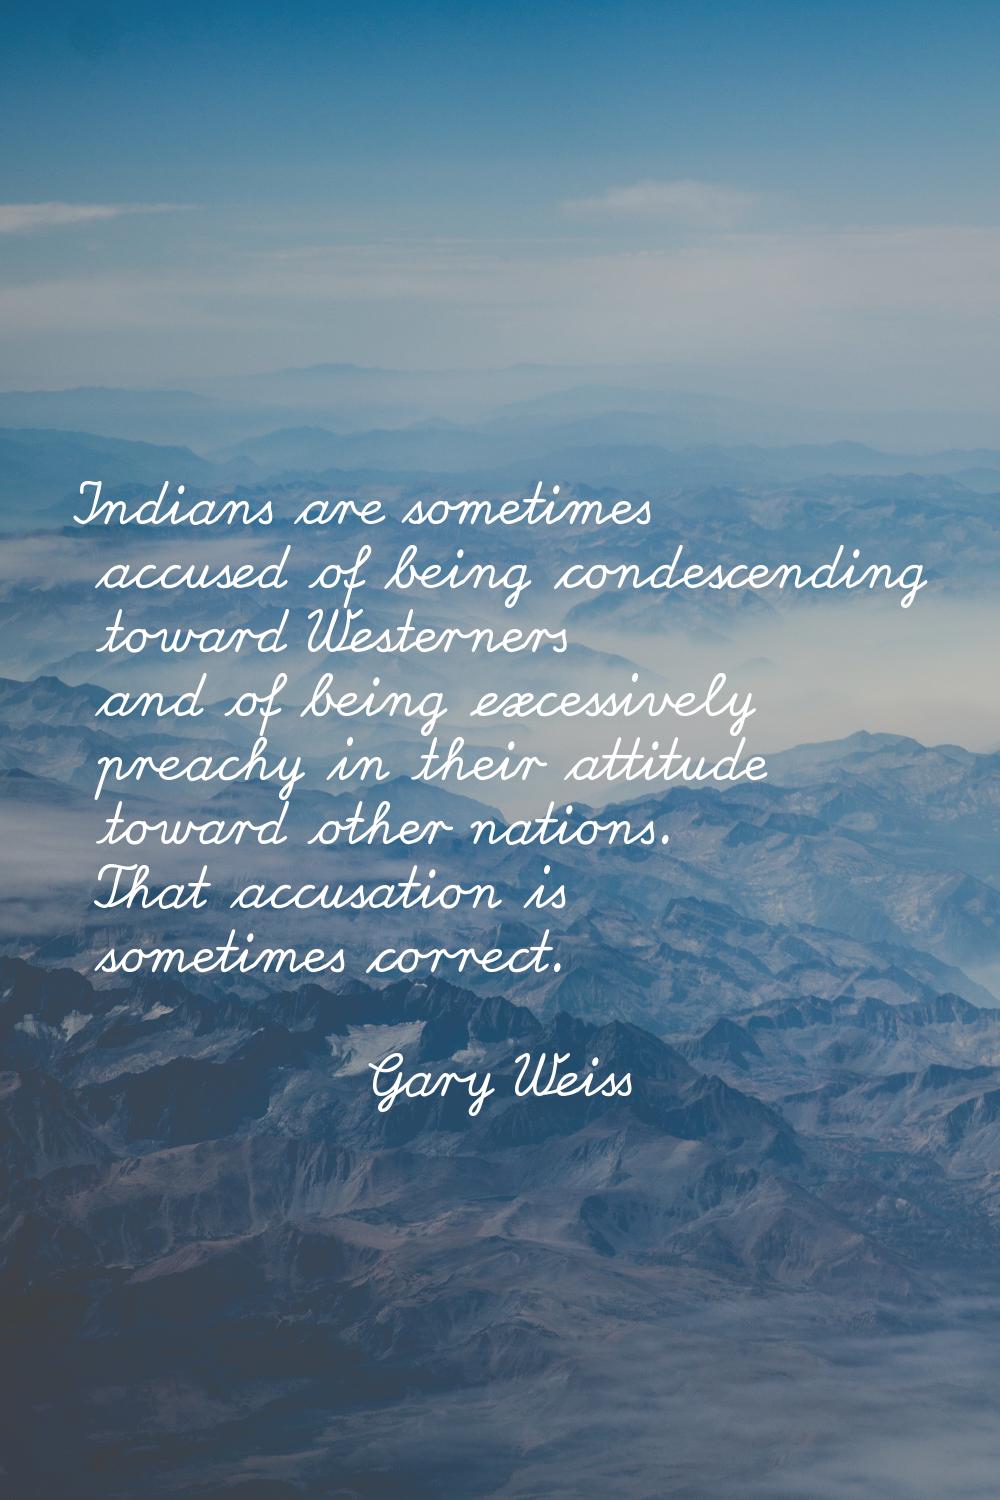 Indians are sometimes accused of being condescending toward Westerners and of being excessively pre